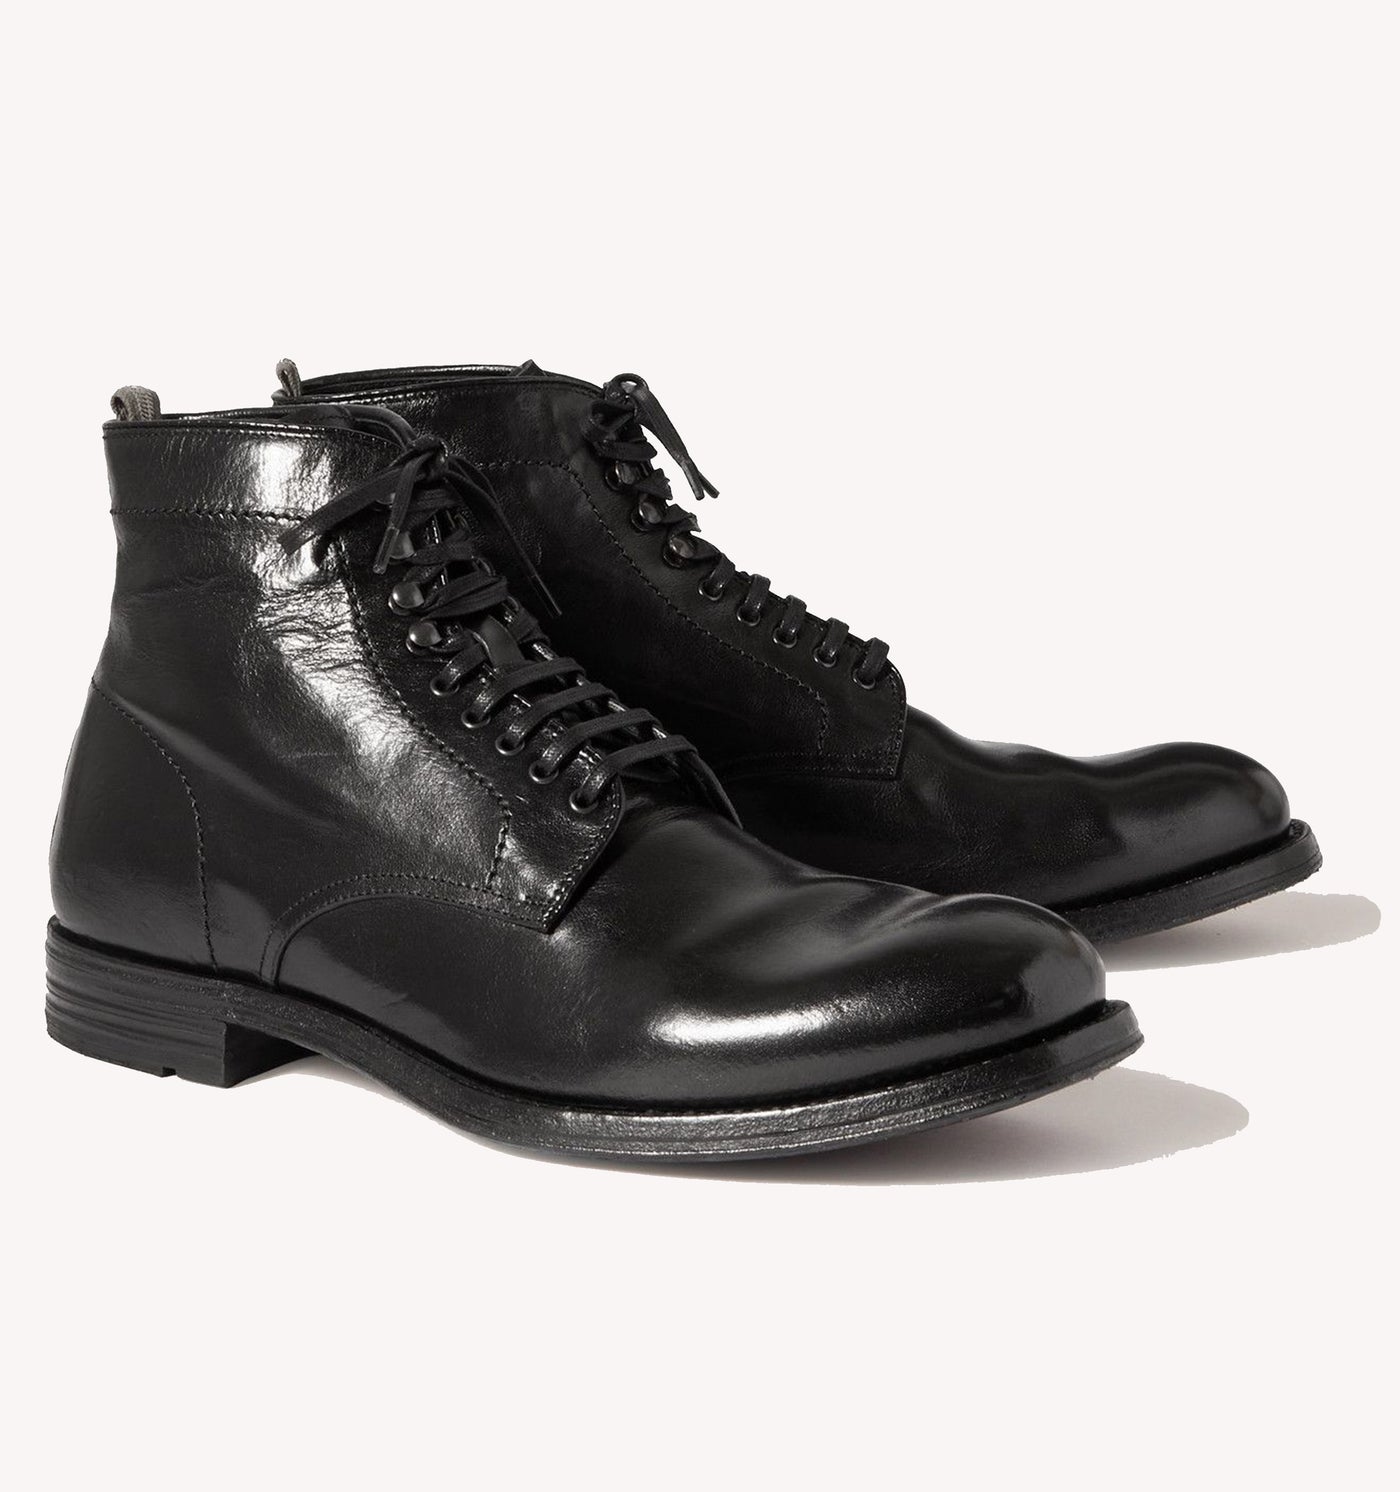 Officine Creative Balance Ankle Boot in Charcoal Black